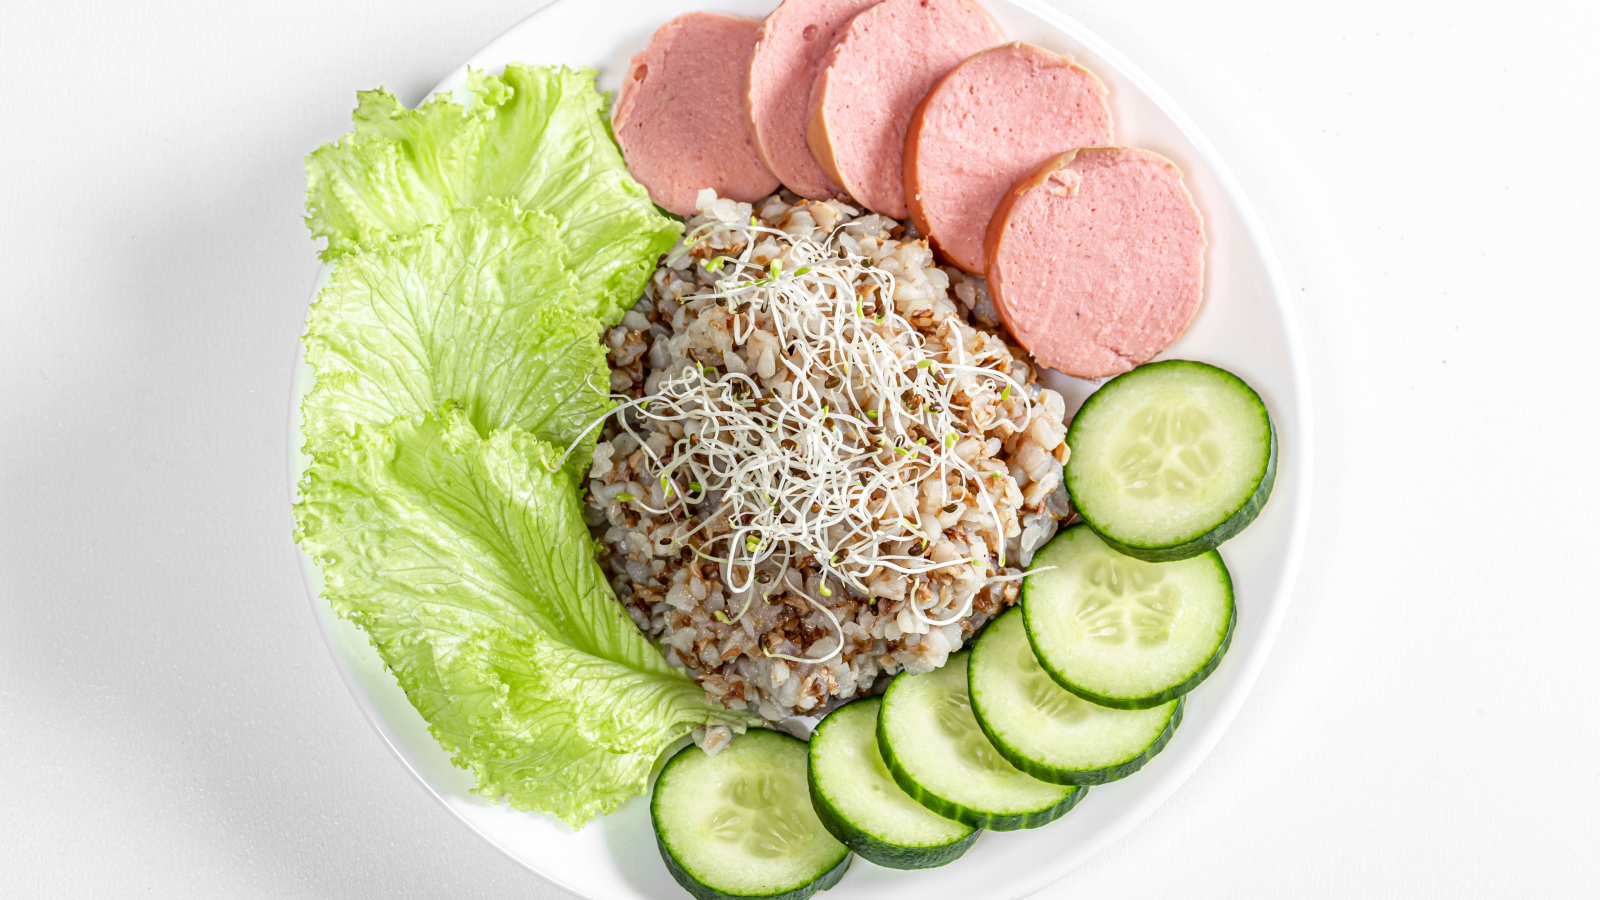 Buckwheat on a plate with cucumber, sausage and lettuce on a white background